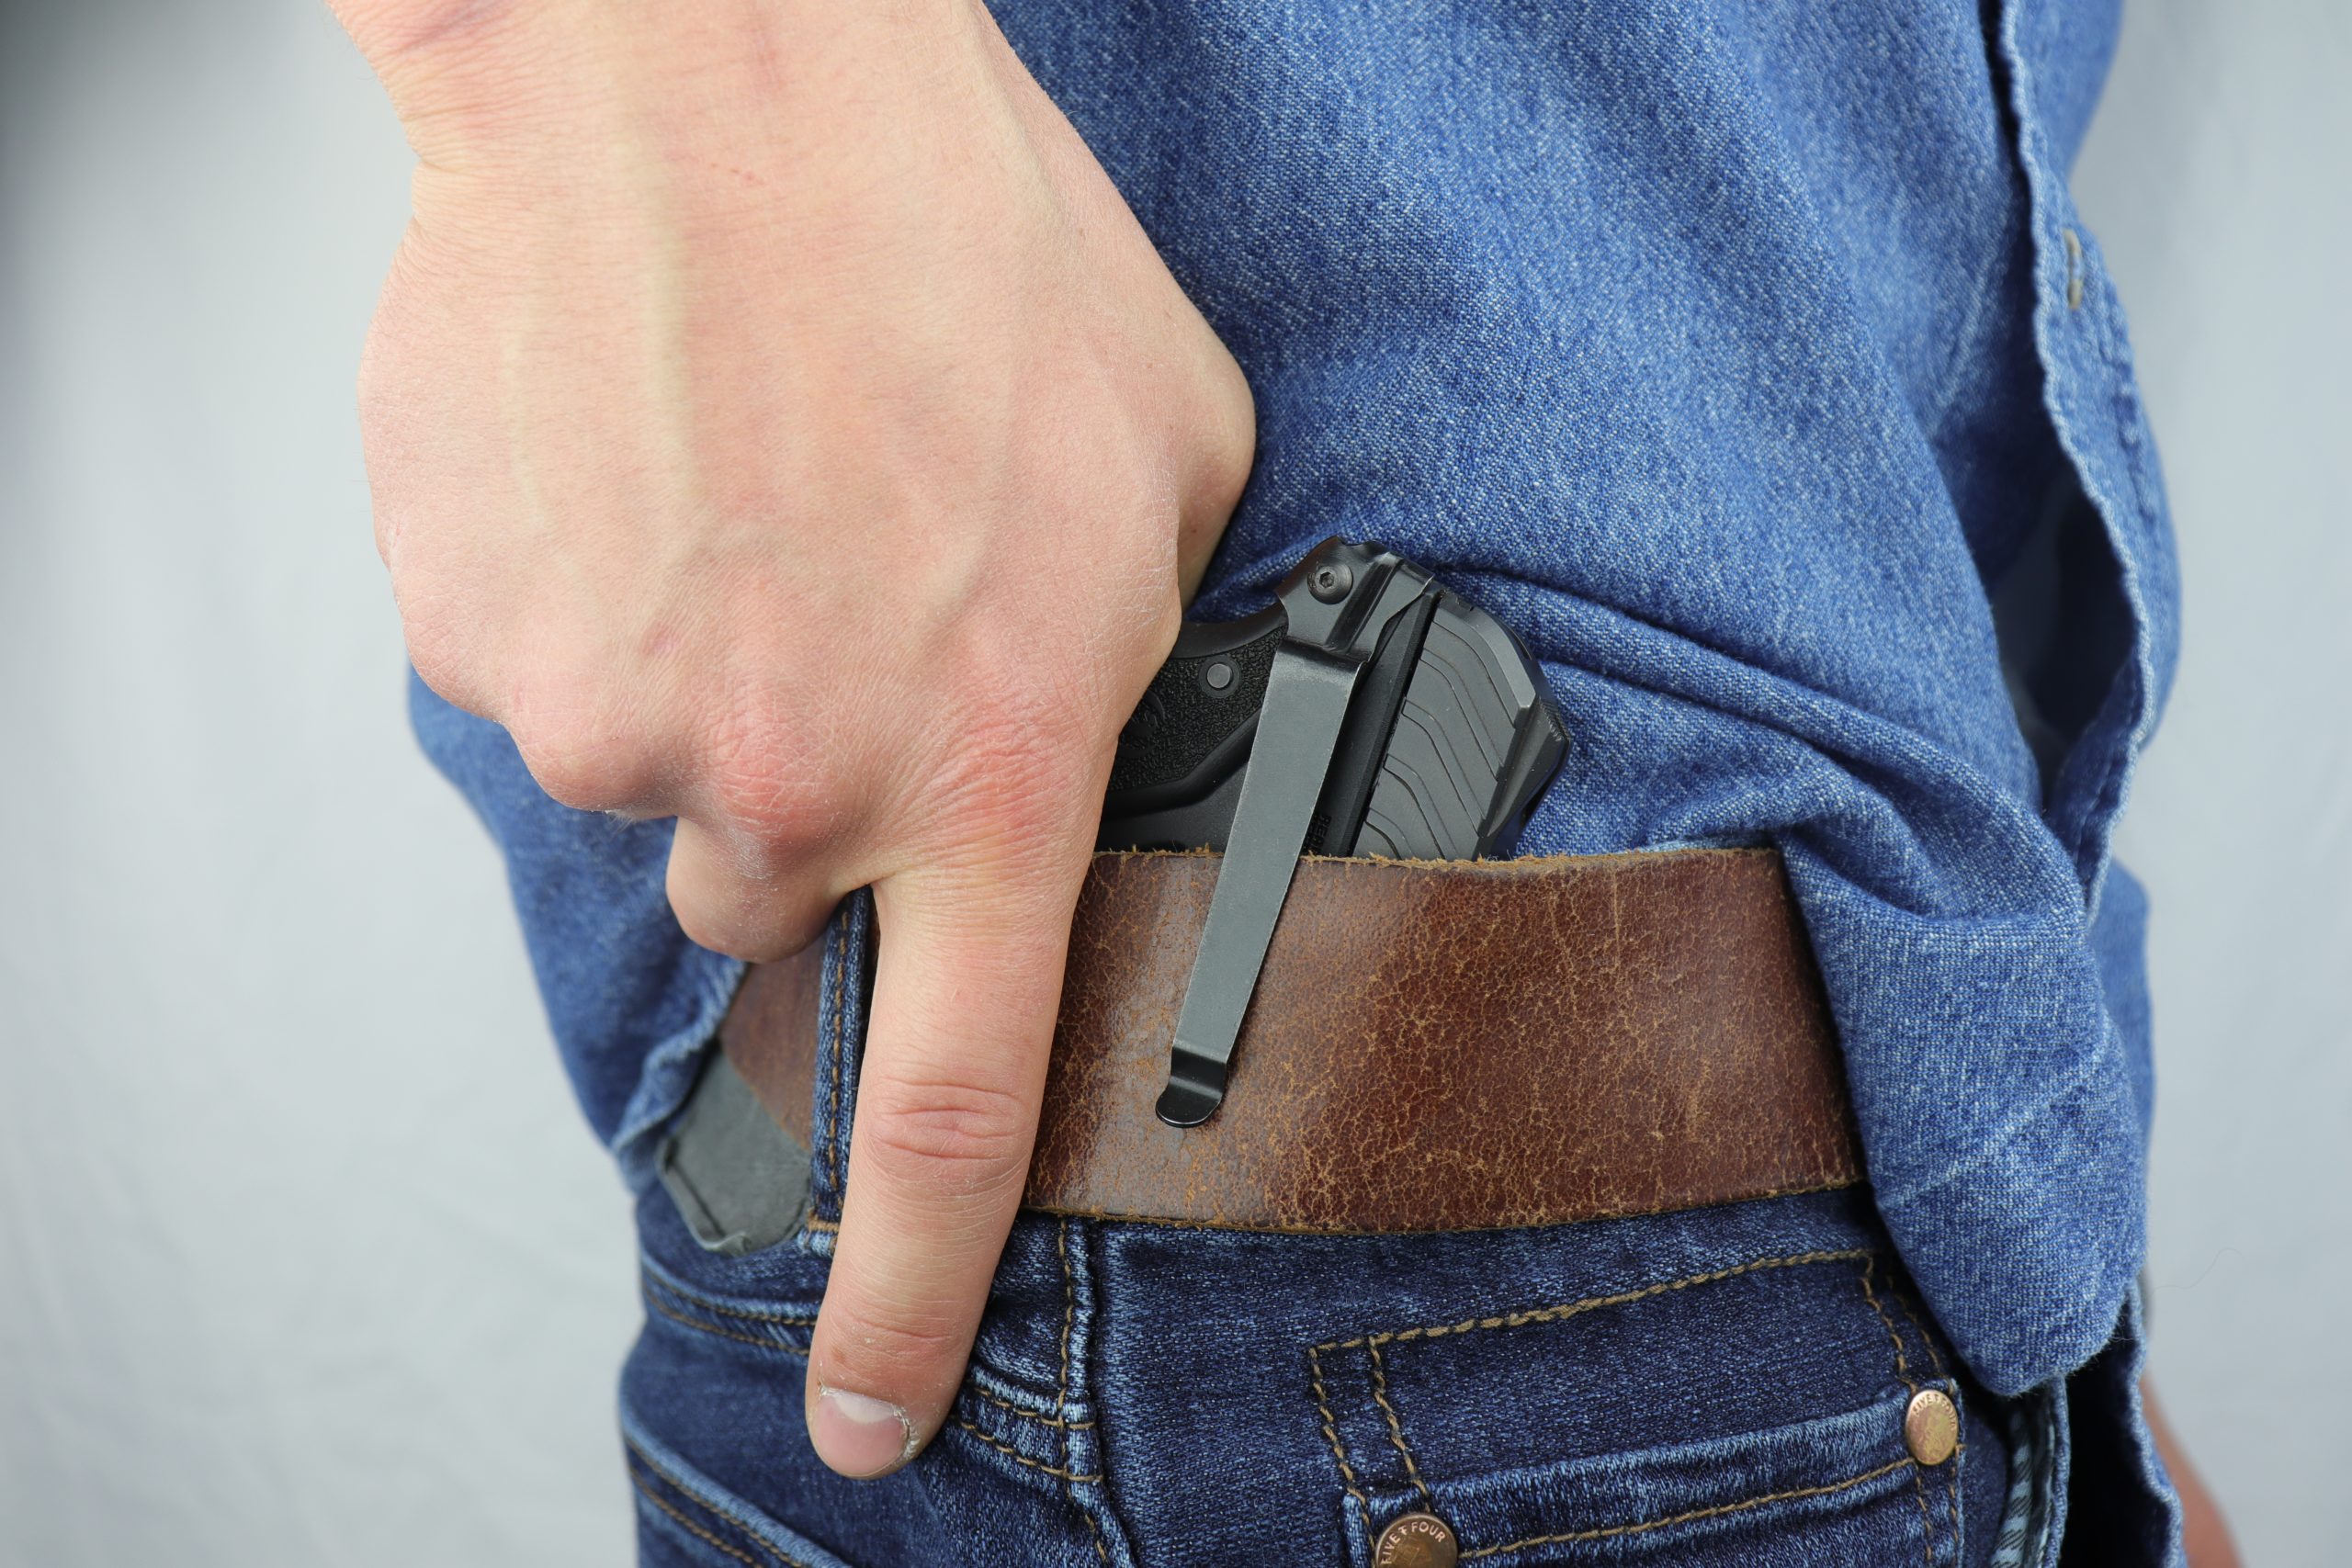 A person reaching for a pistol secured to their waistband with a Clipdraw belt clip.